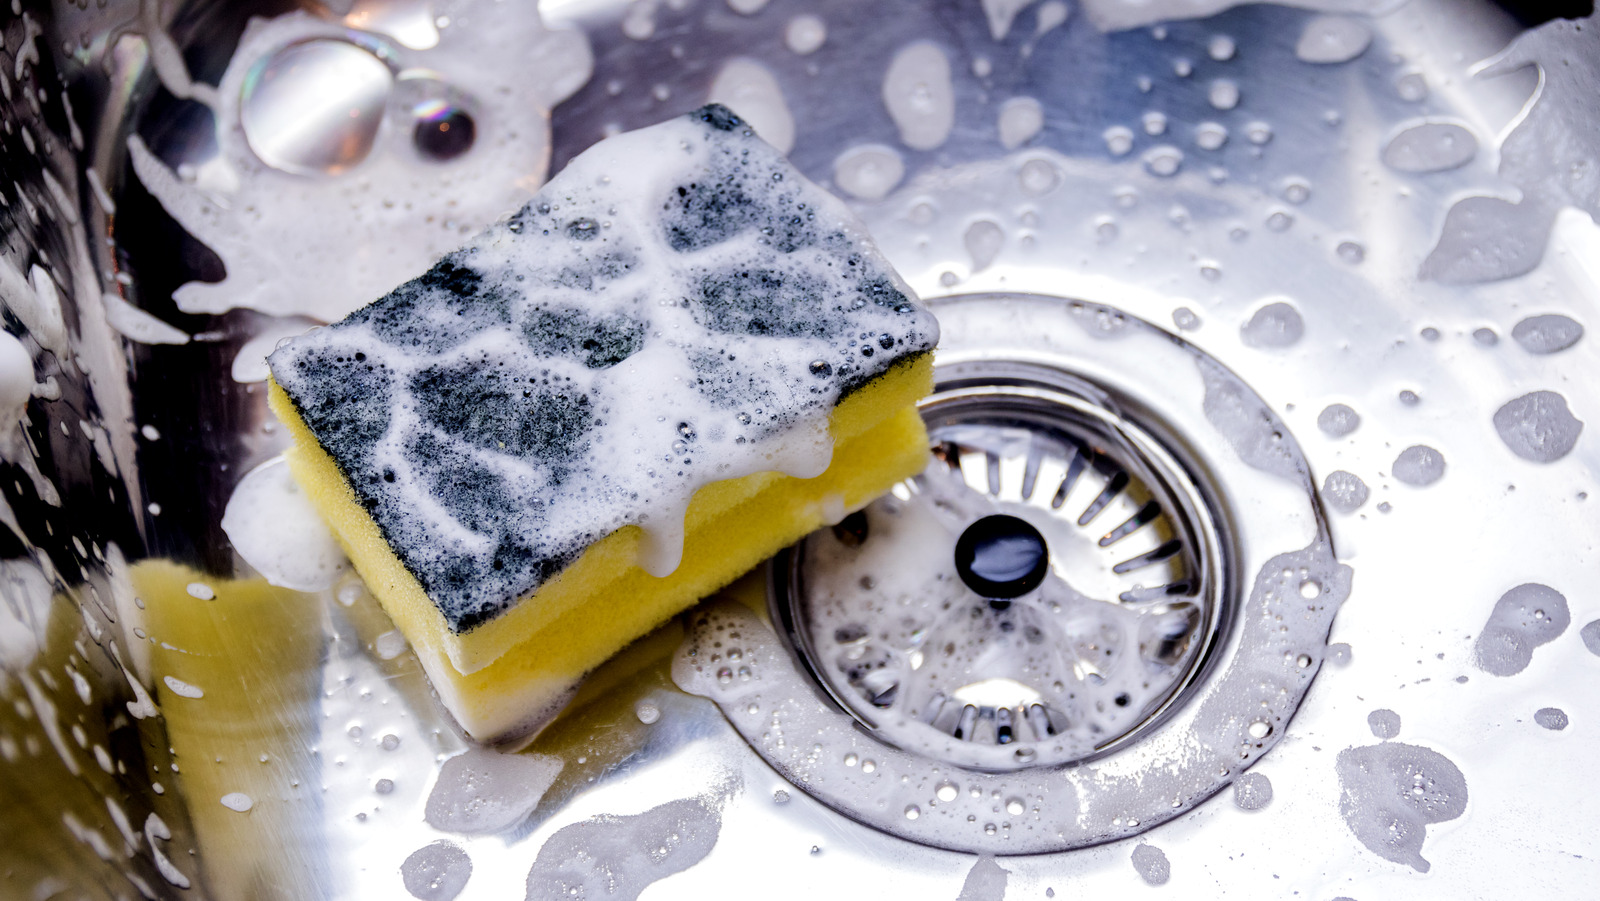 Ask Wirecutter: How Do I Stop My Spouse From Leaving Wet Sponges